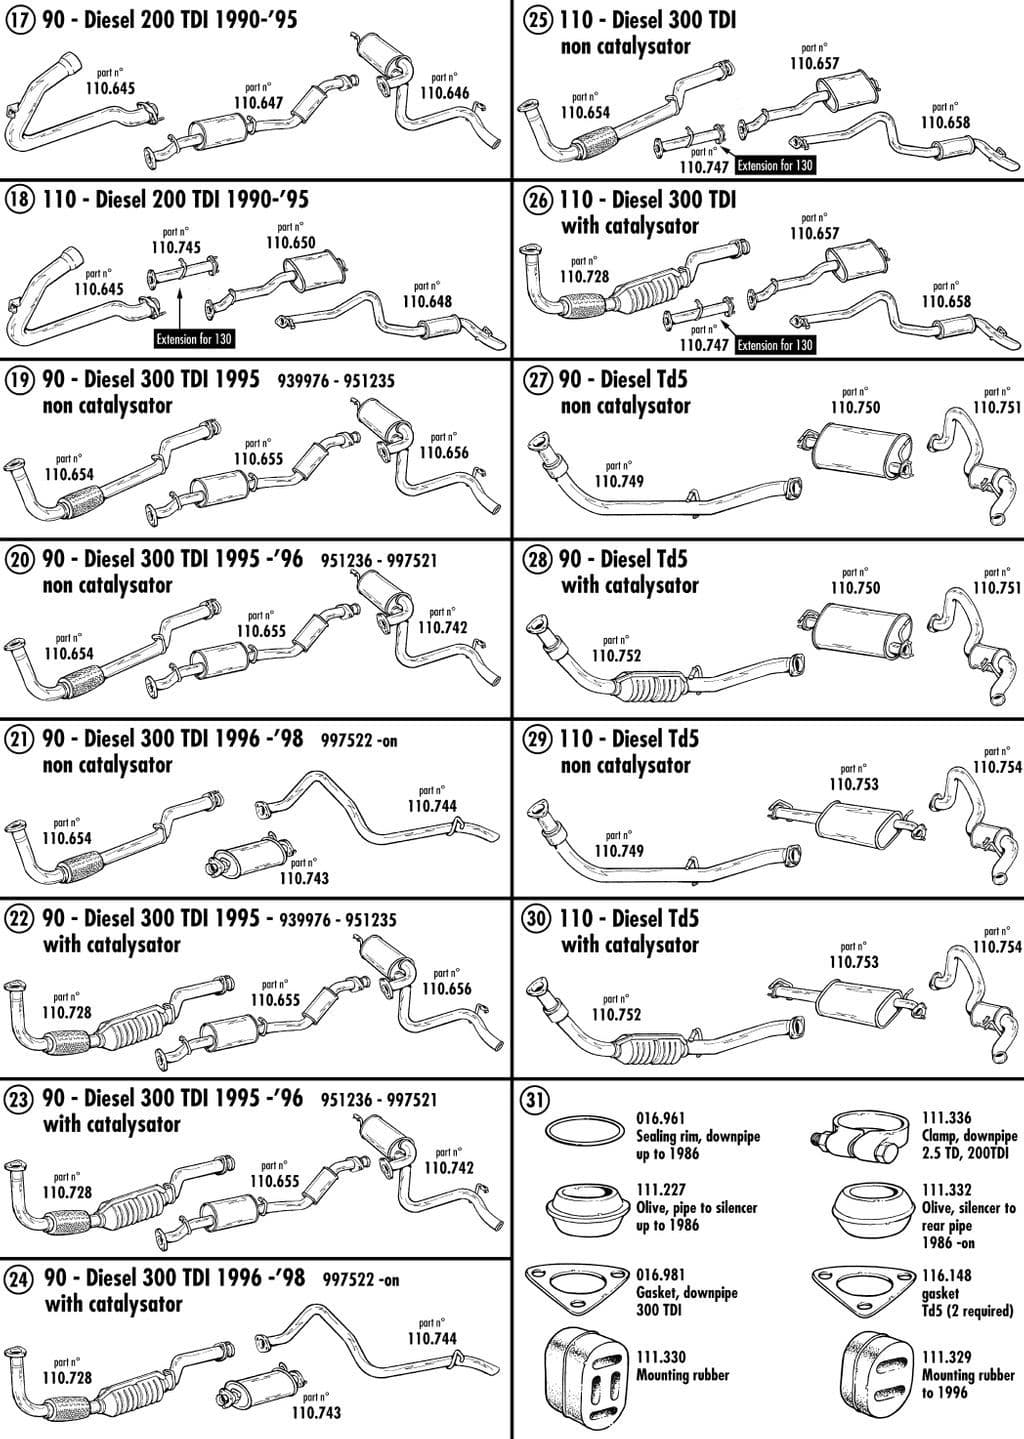 Land Rover Defender 90-110 1984-2006 - Front/Down pipes - Exhaust systems & fittings - 1